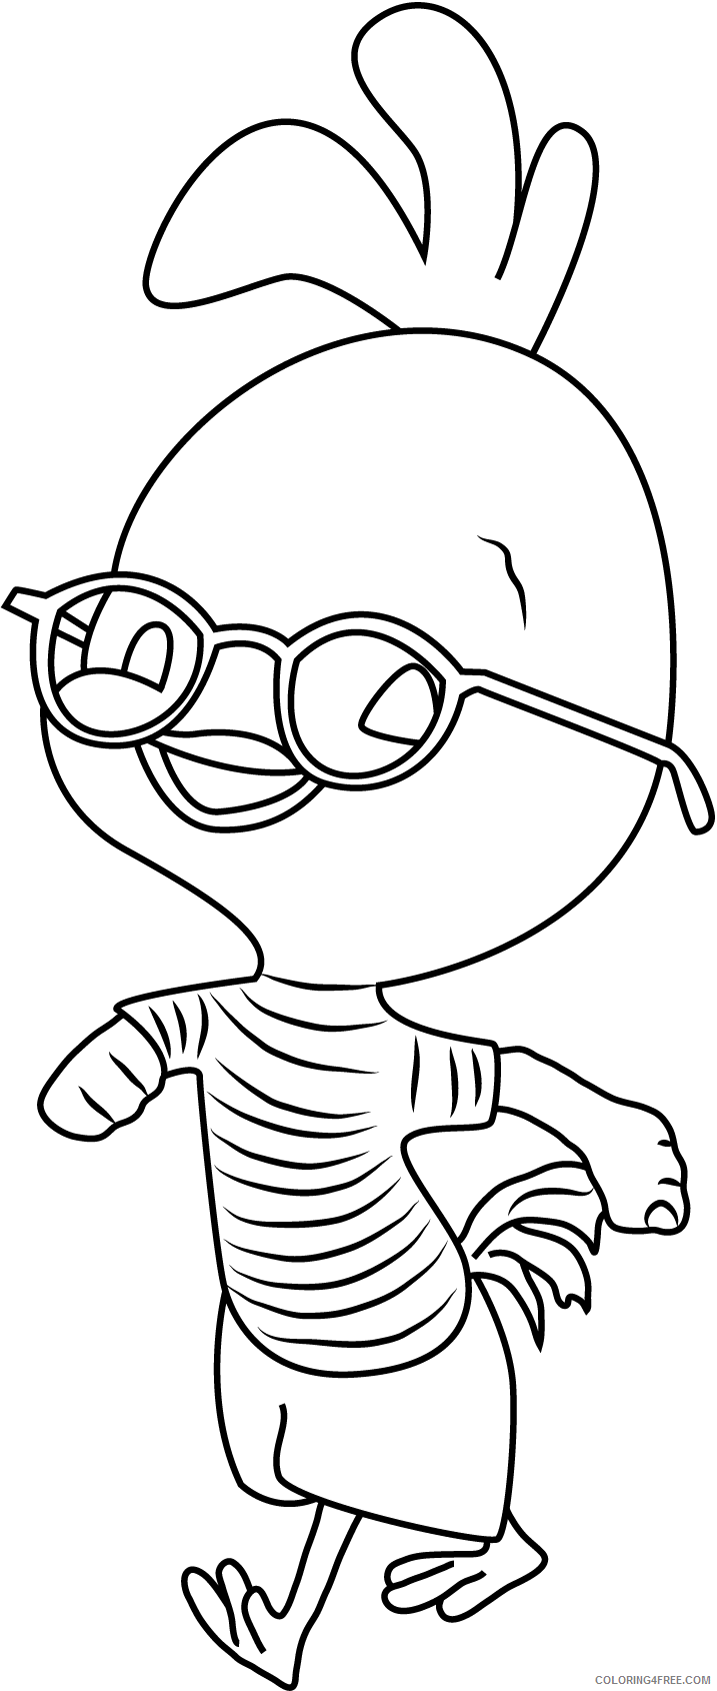 Chicken Little Coloring Pages TV Film chicken little walking 2020 02067 Coloring4free